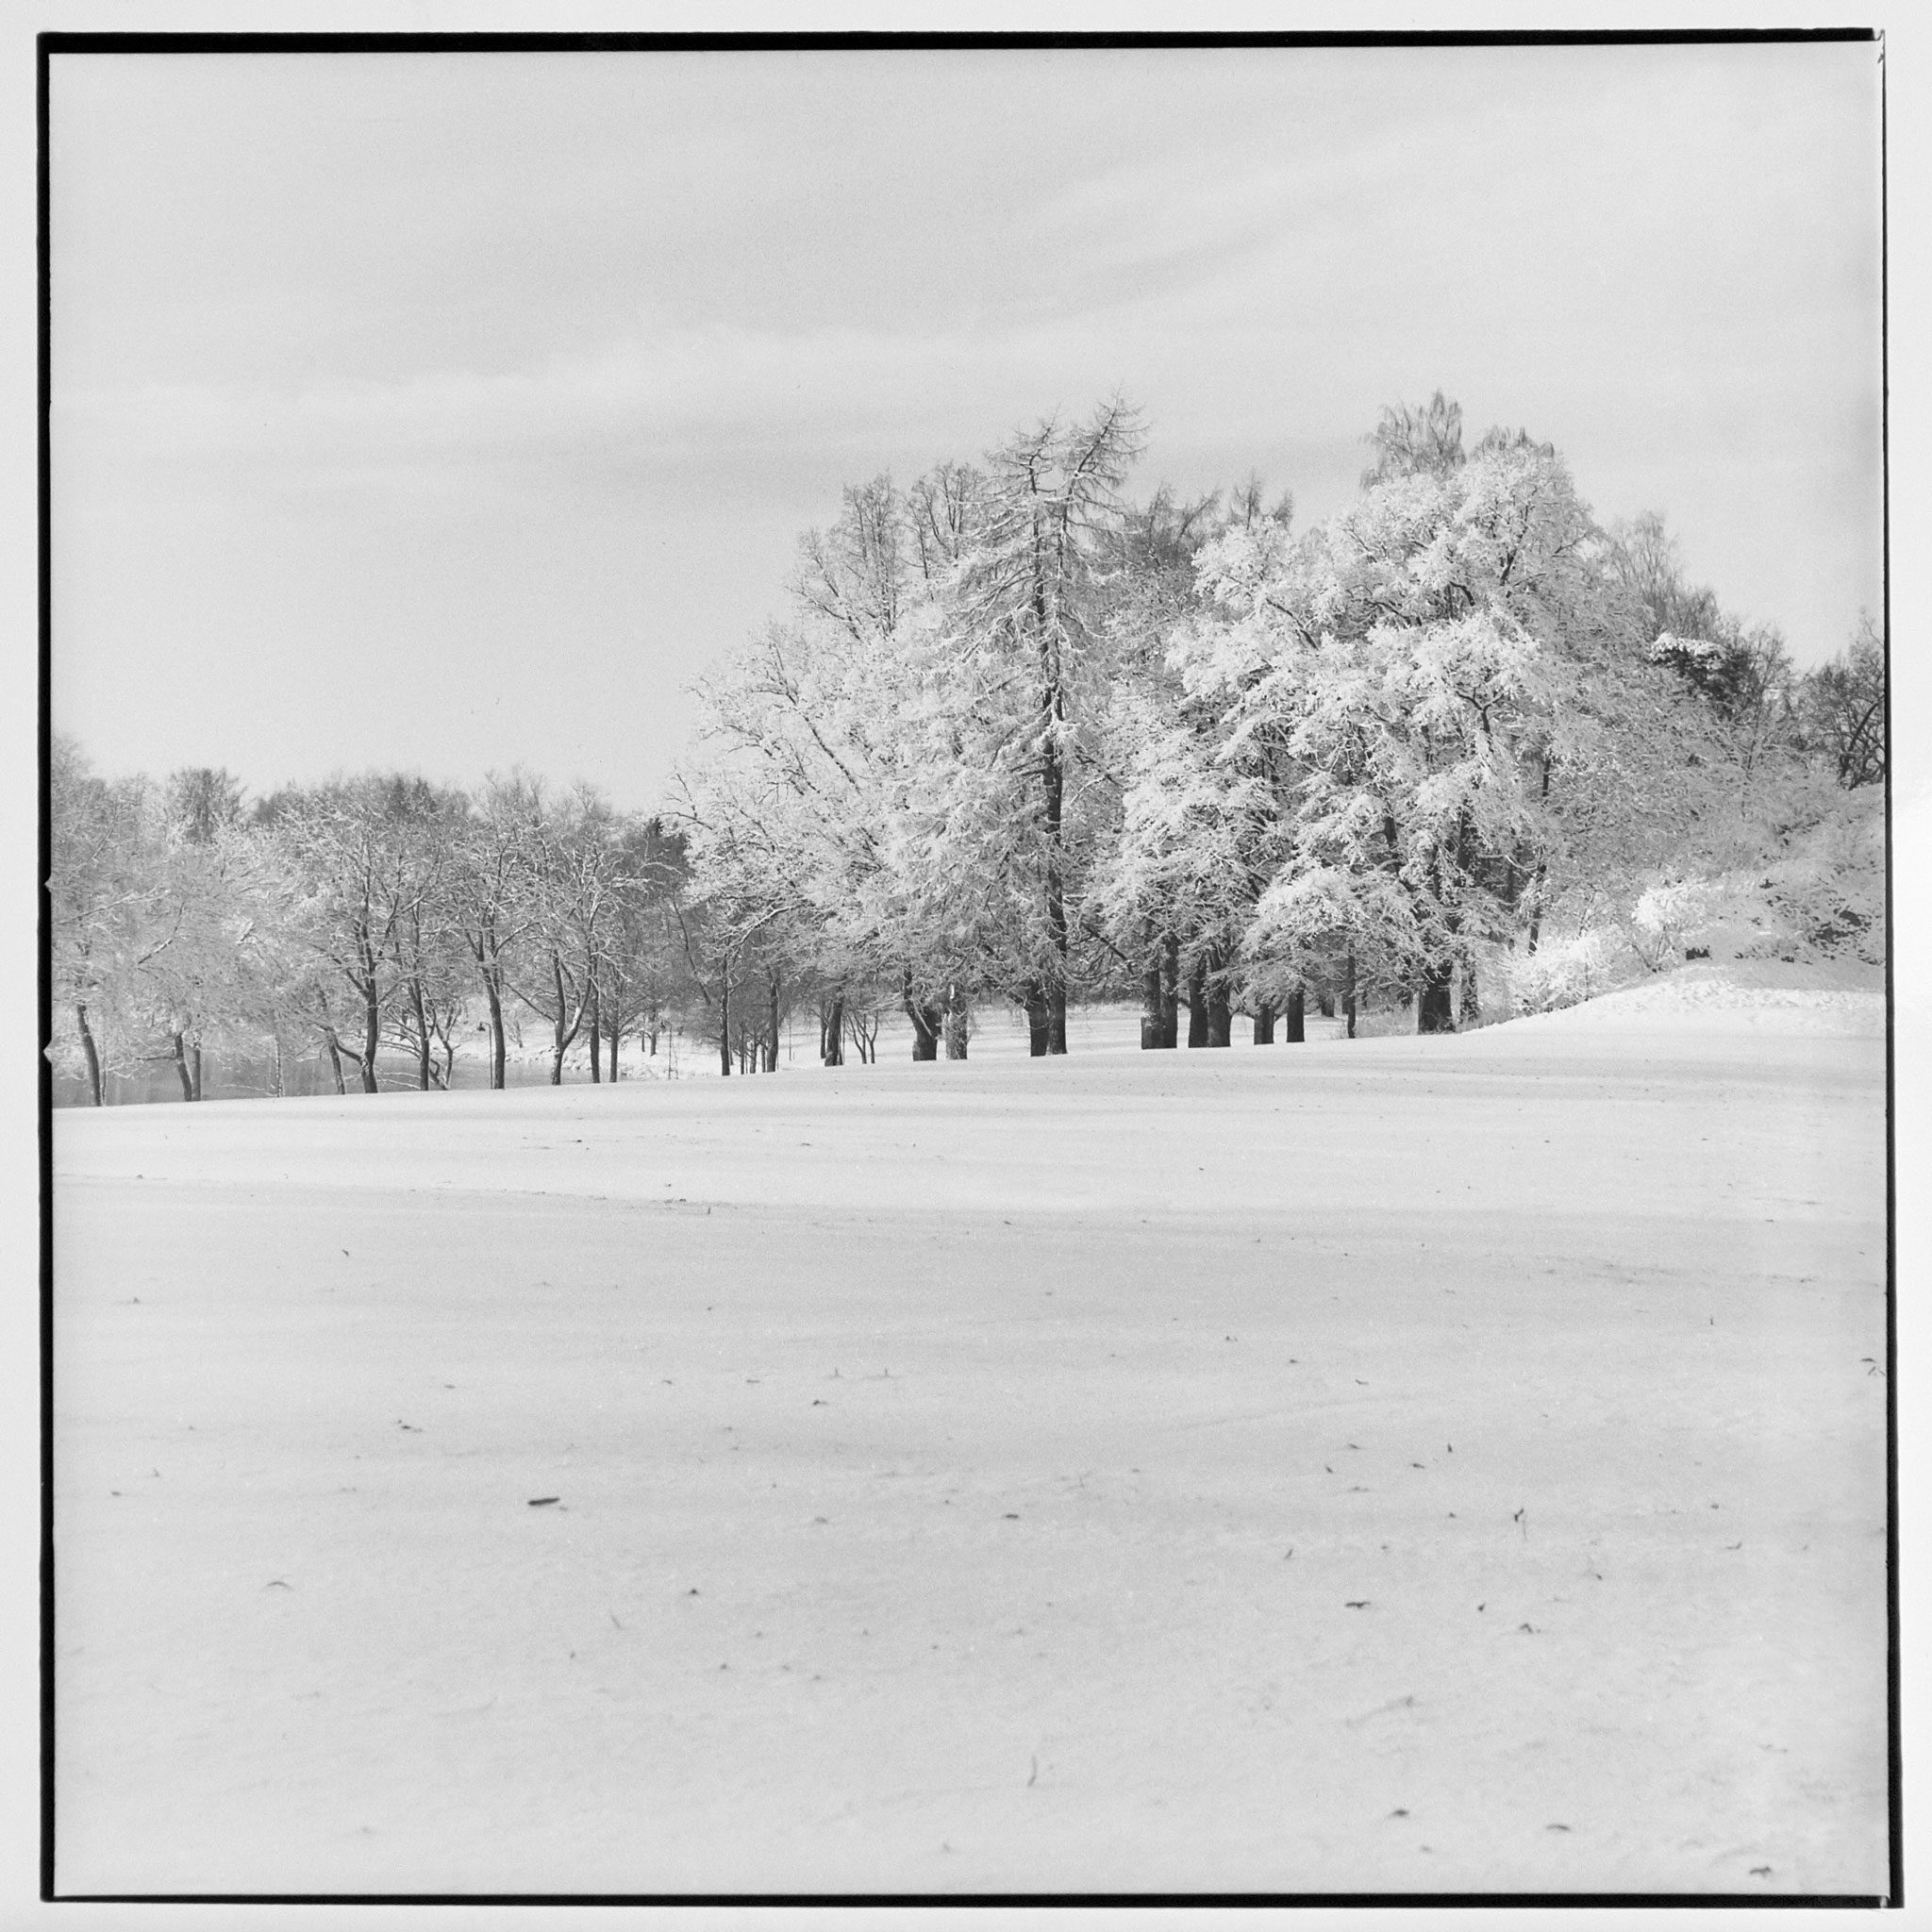 Black and white darkroom print of snowy landscape with trees in the background.